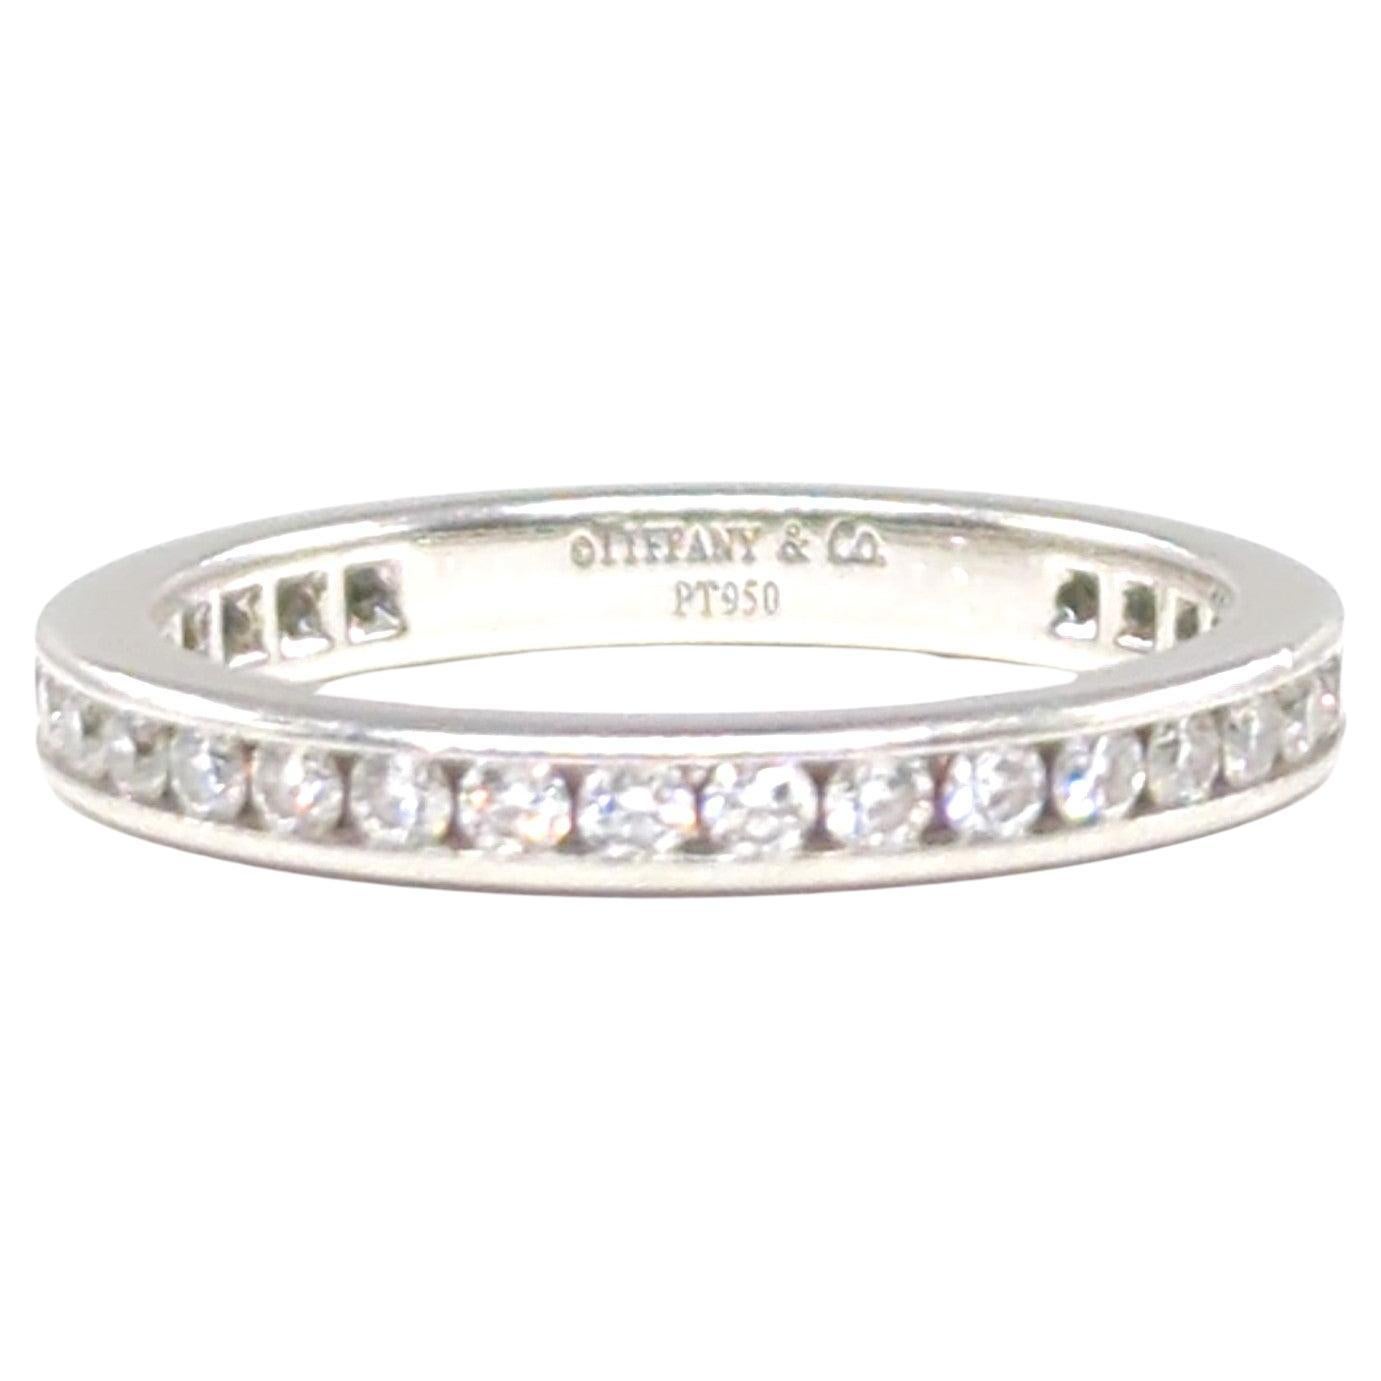 Tiffany & Co. Iconic Diamond Full Circle Eternity Band Ring 0.73 CTW Size 5.5 For Sale 3